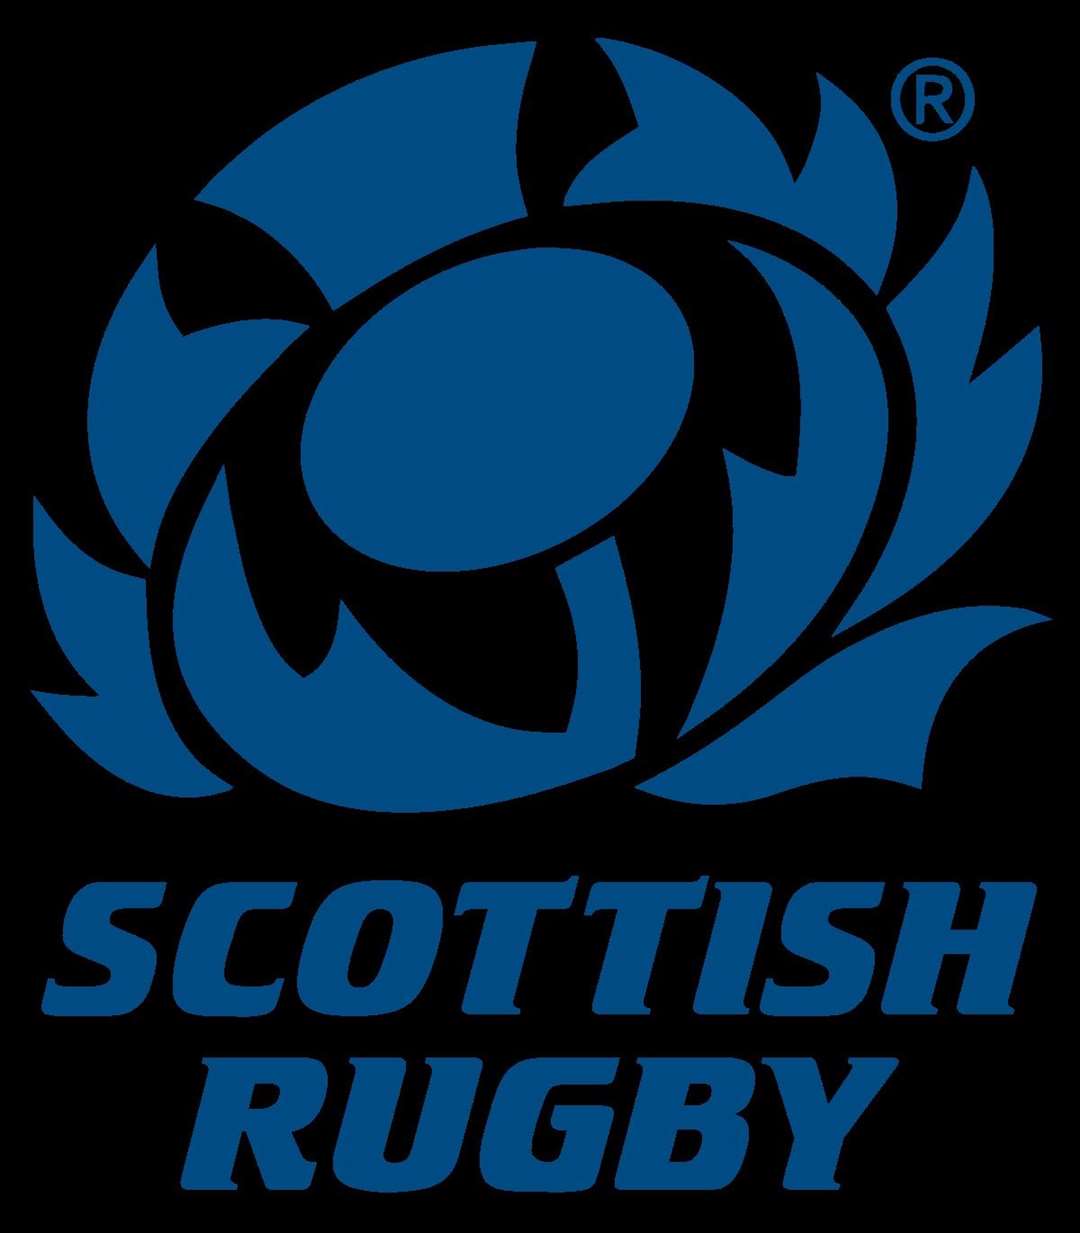 Scottish Rugby have joined the social media blackout.